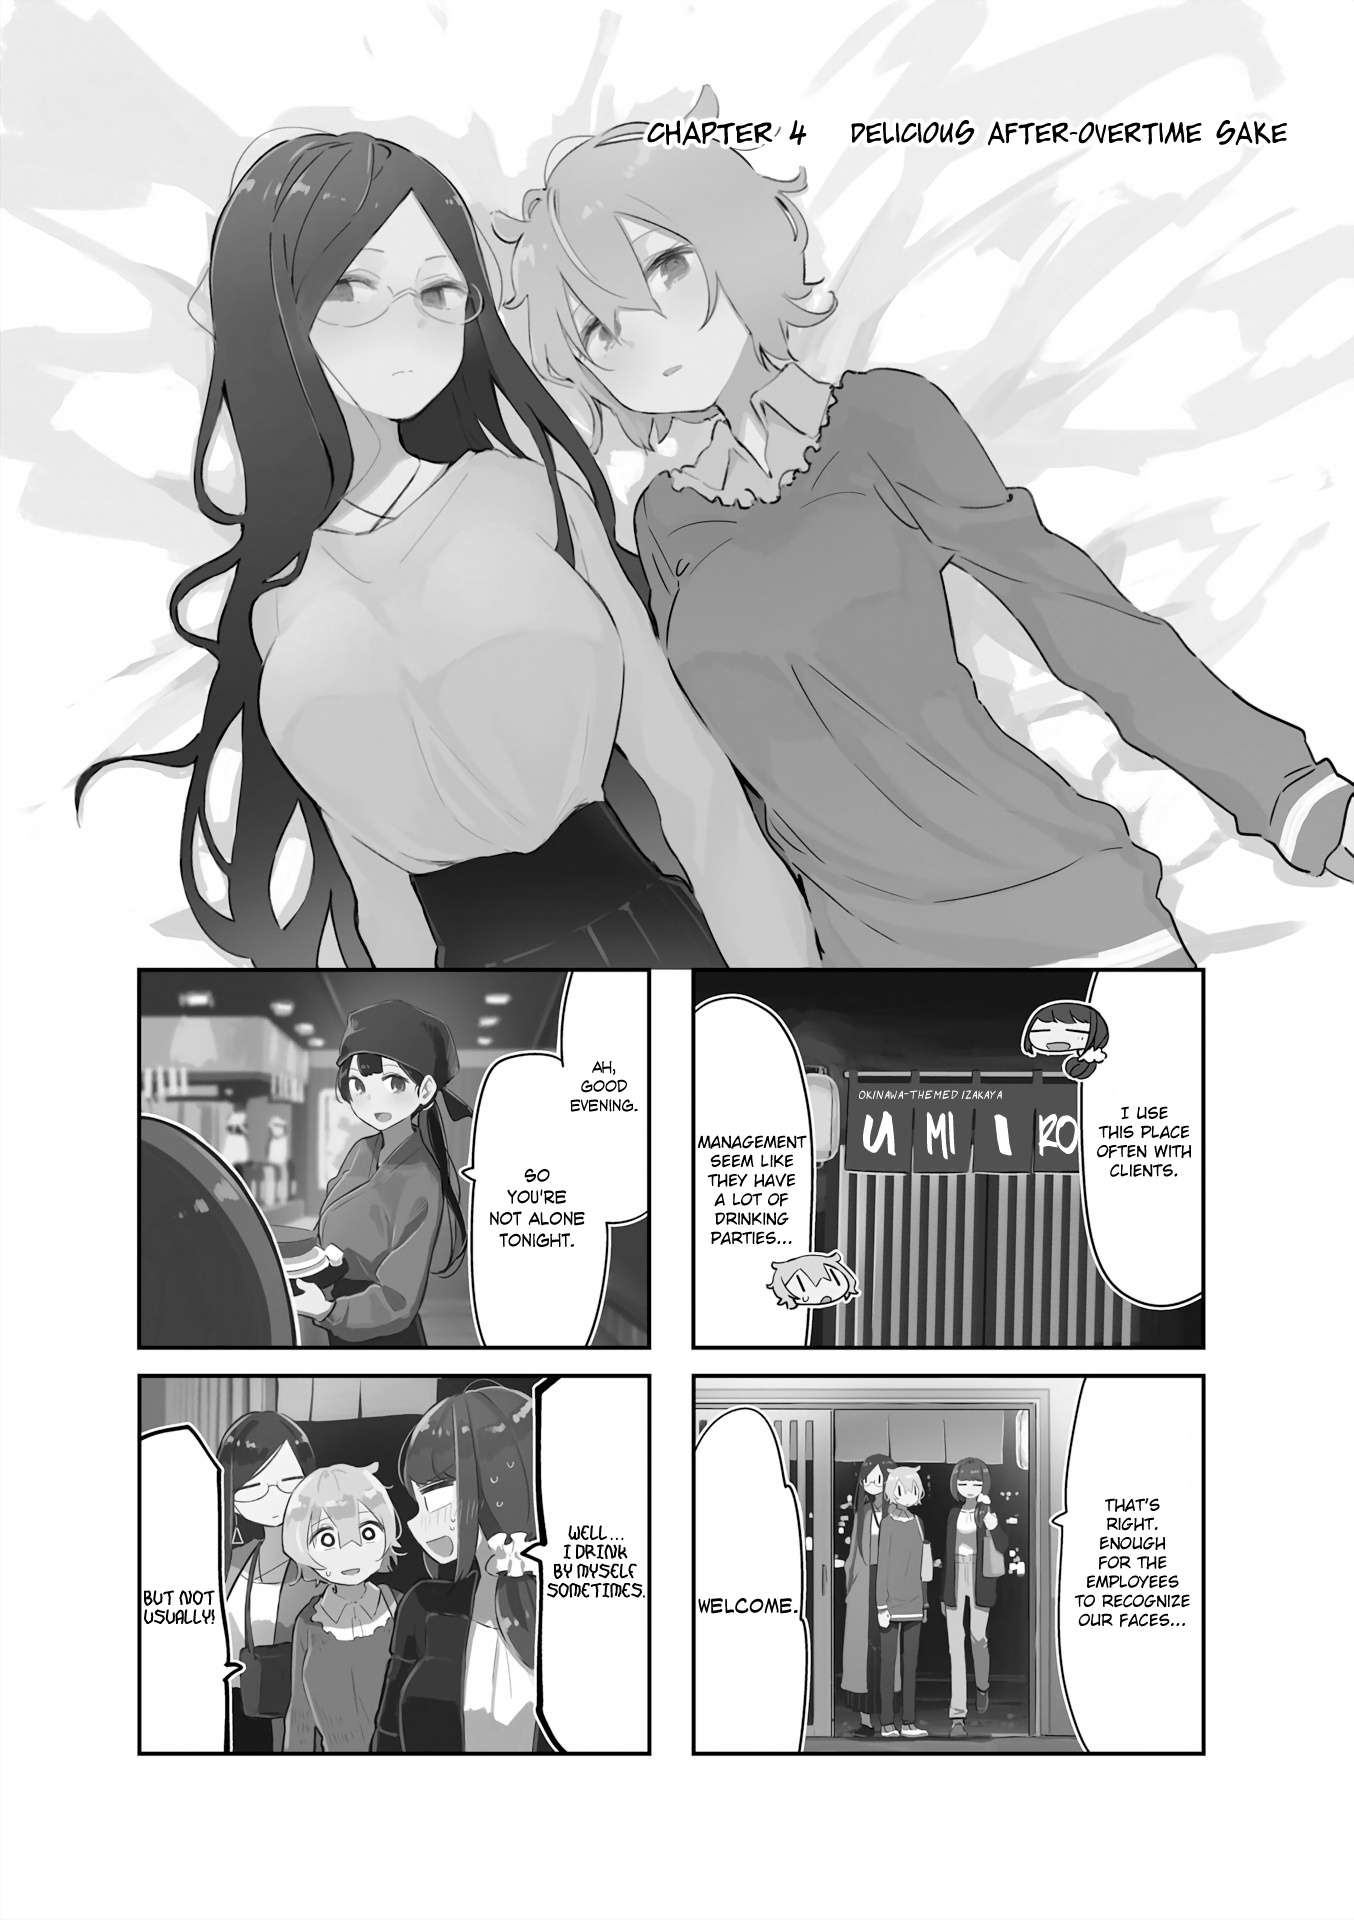 Hogushite, Yui-San Vol.1 Chapter 4: Delicious After-Overtime Sake - Picture 1